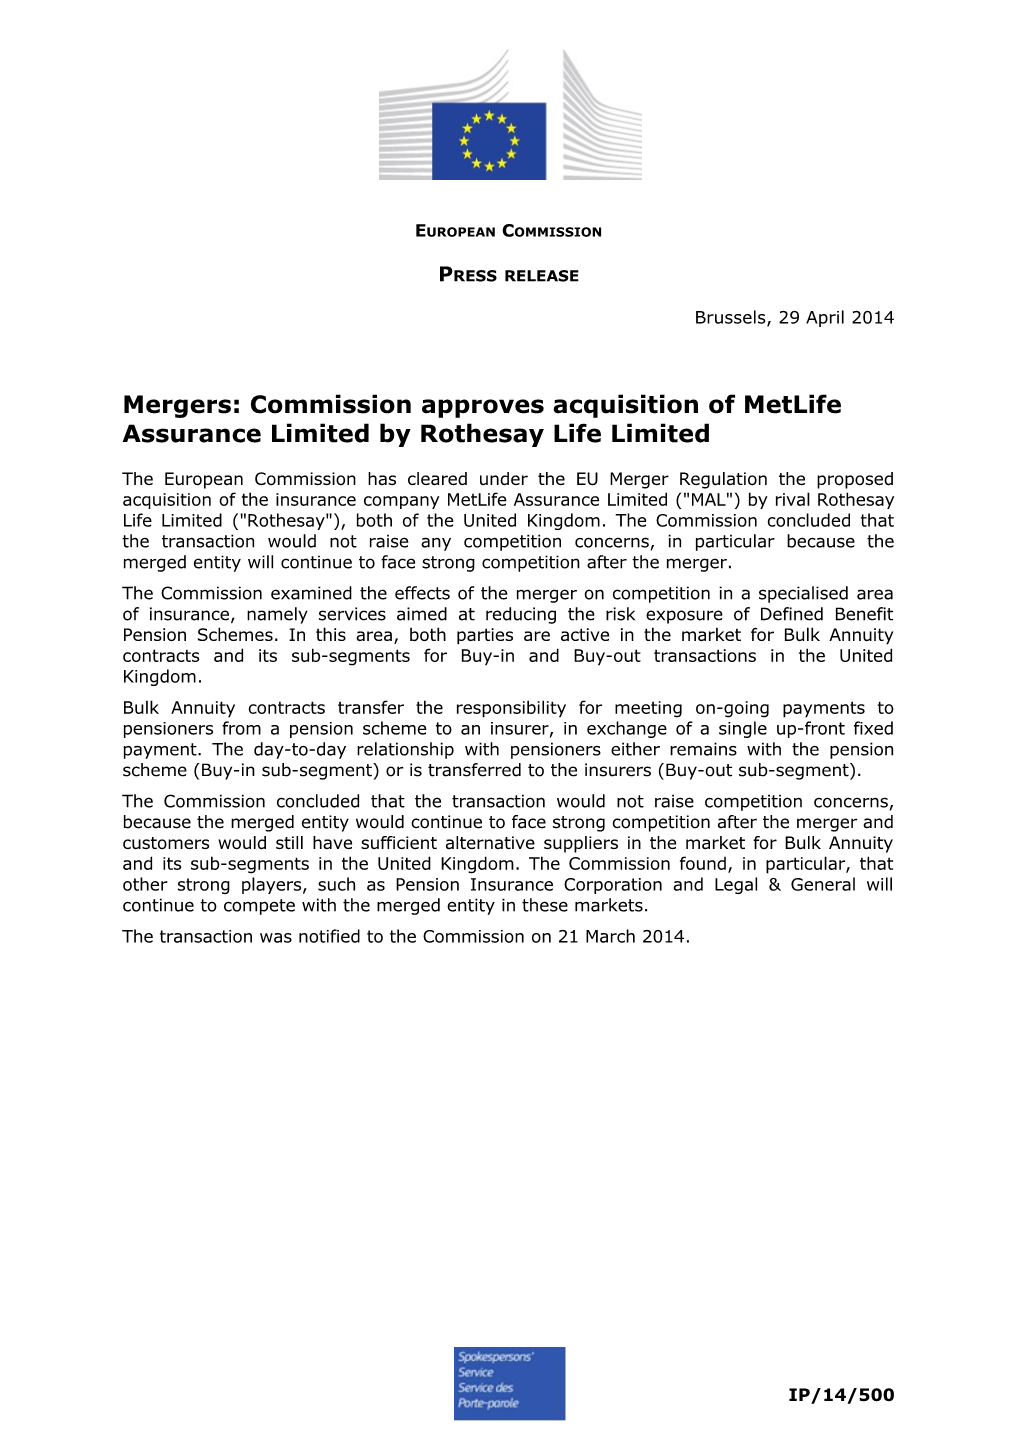 Mergers: Commission Approves Acquisition of Metlife Assurance Limited by Rothesay Life Limited